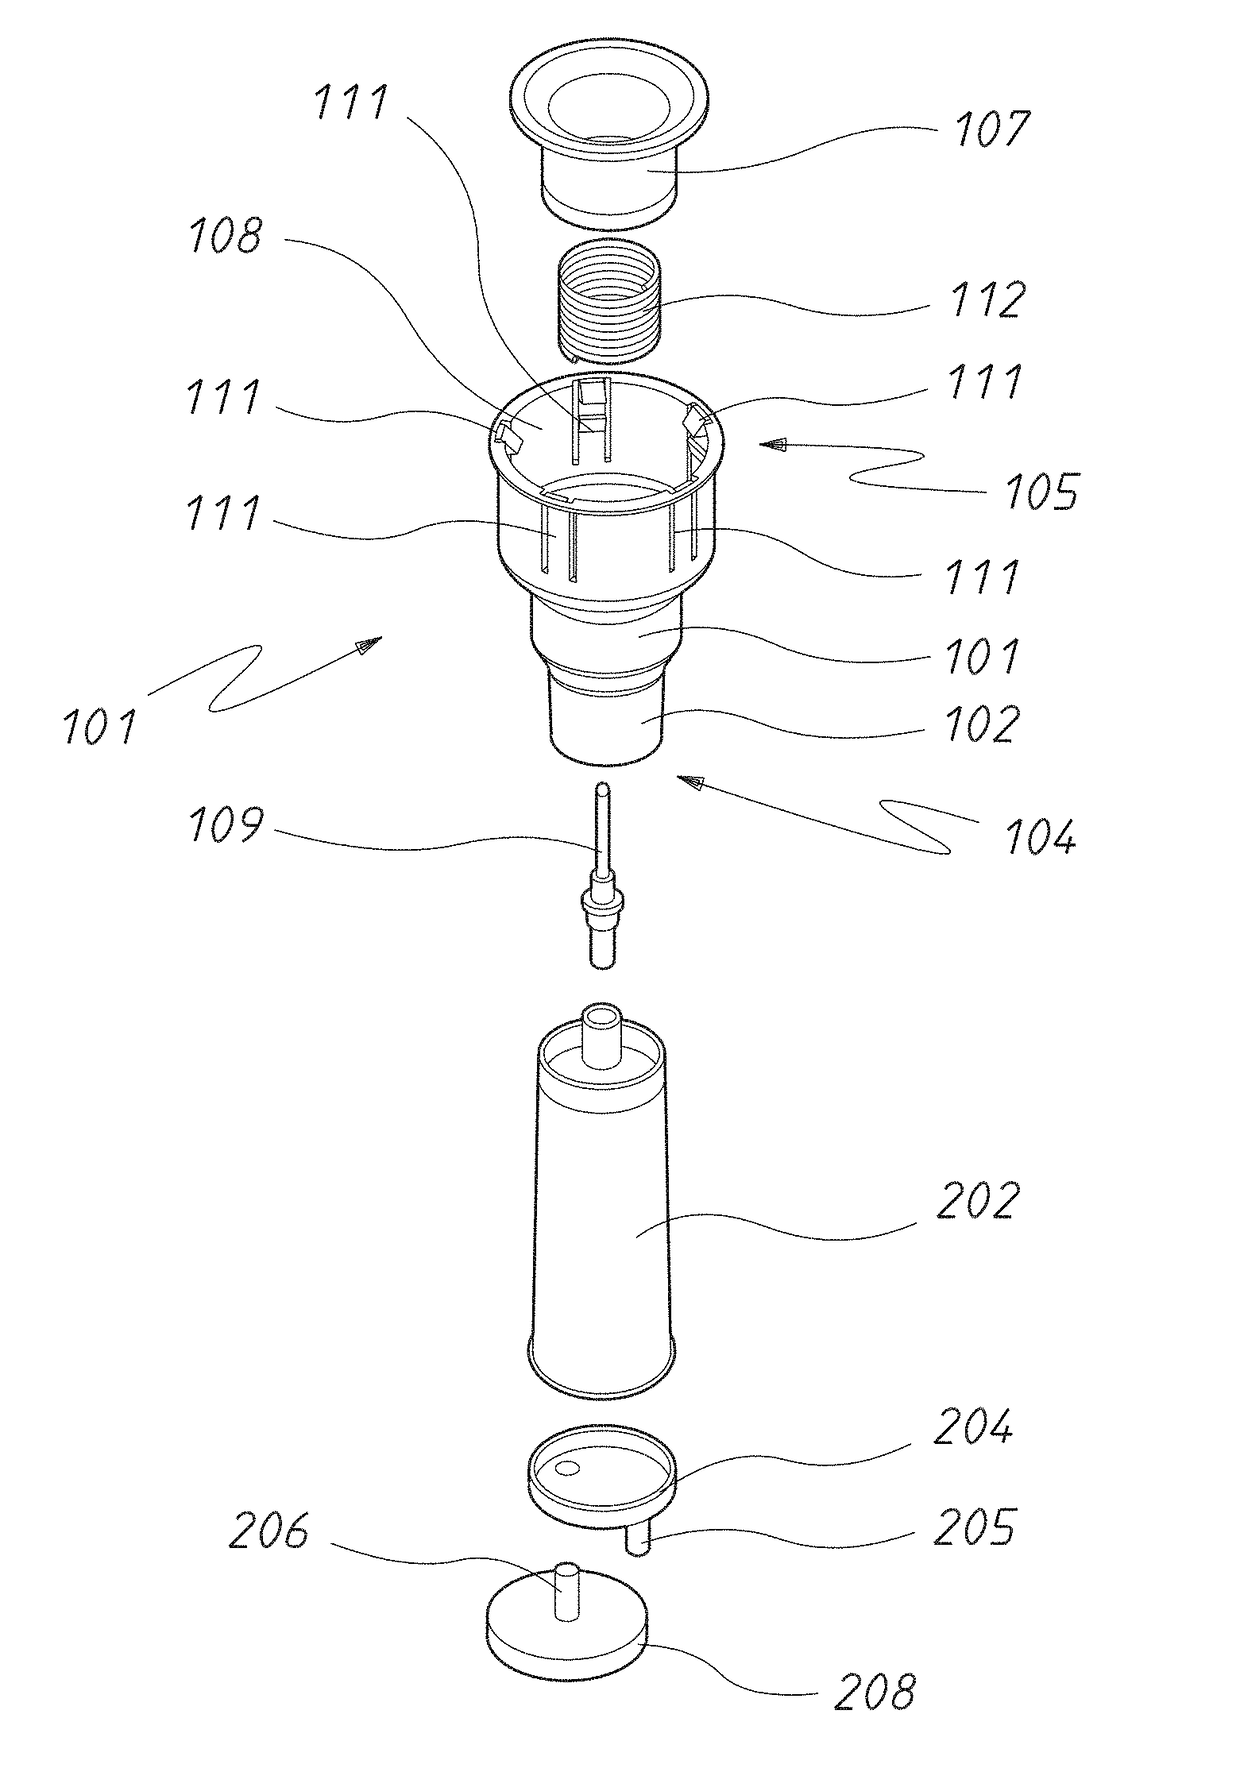 Liquid sampling device with passive safety